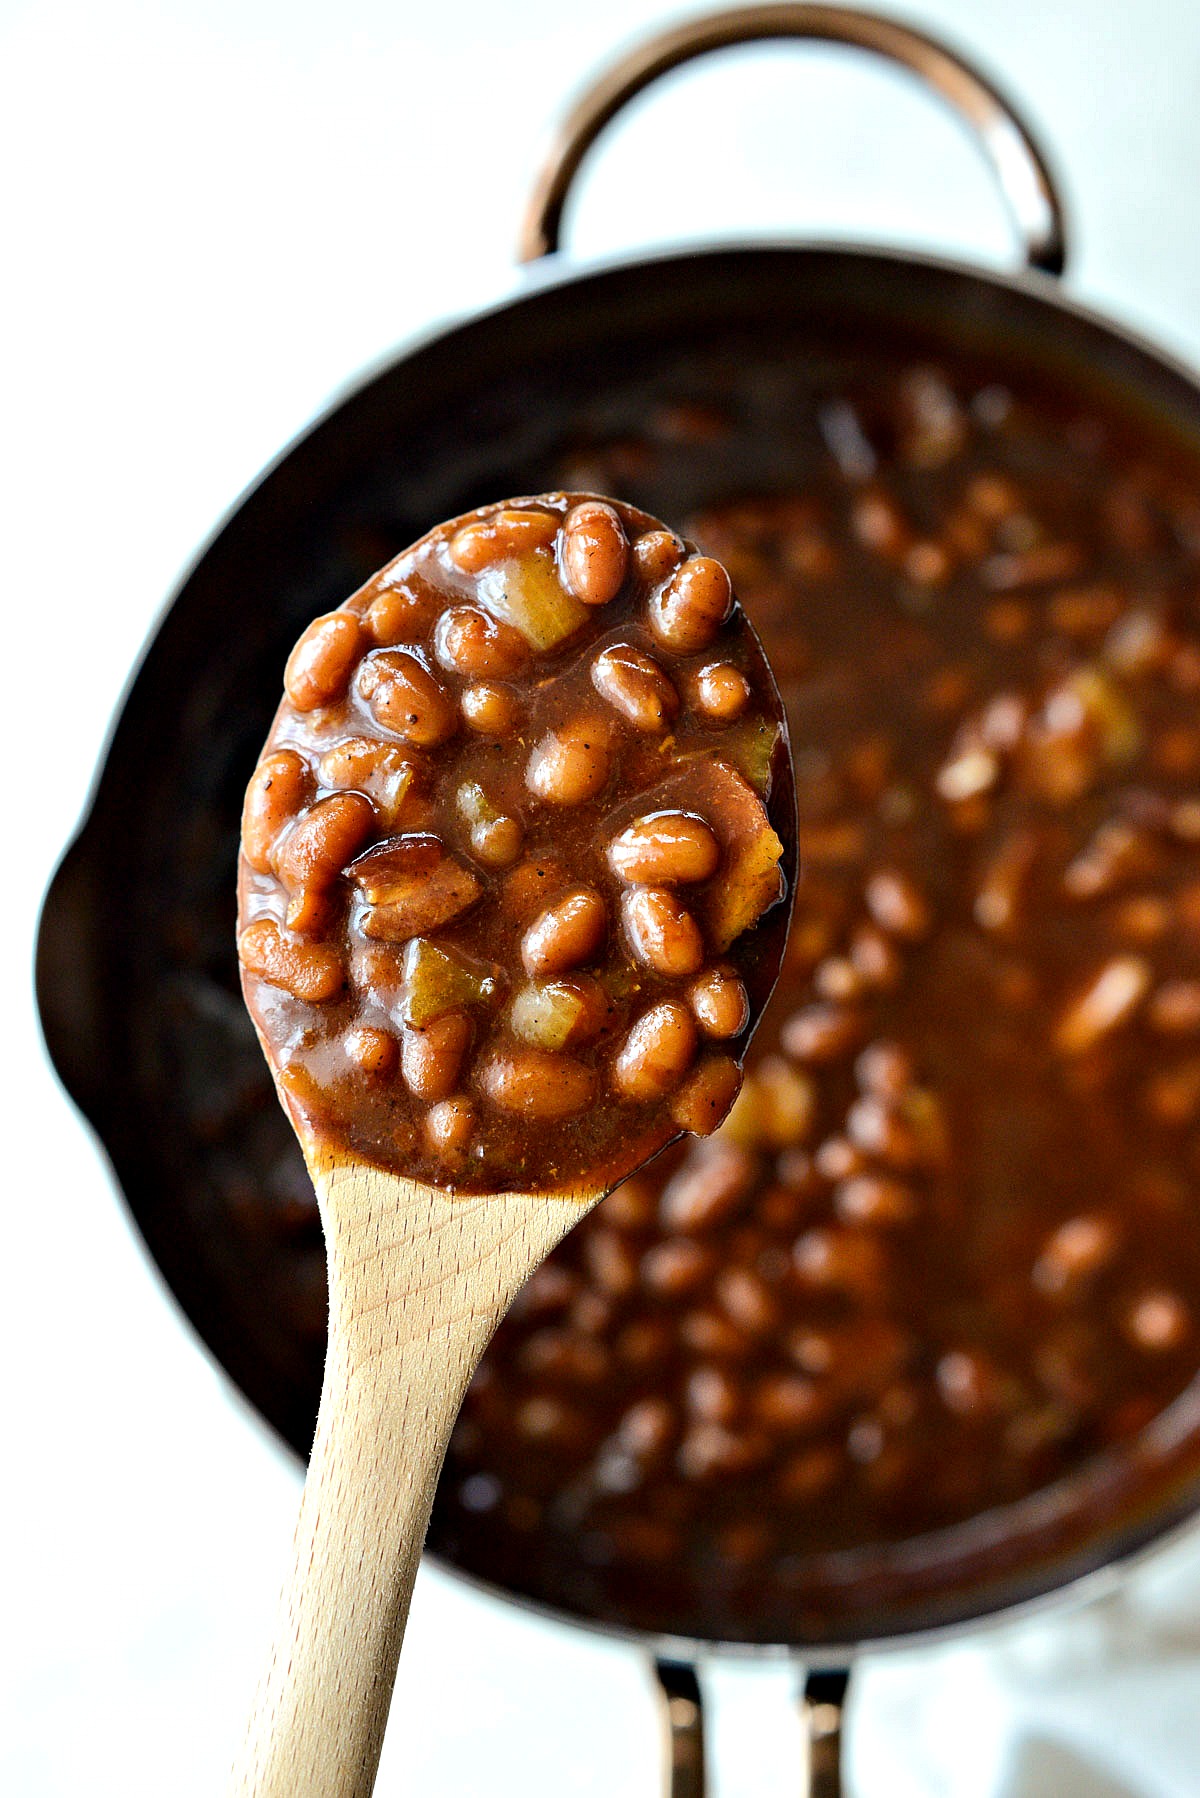 My Mom's Baked Beans - Simply Scratch